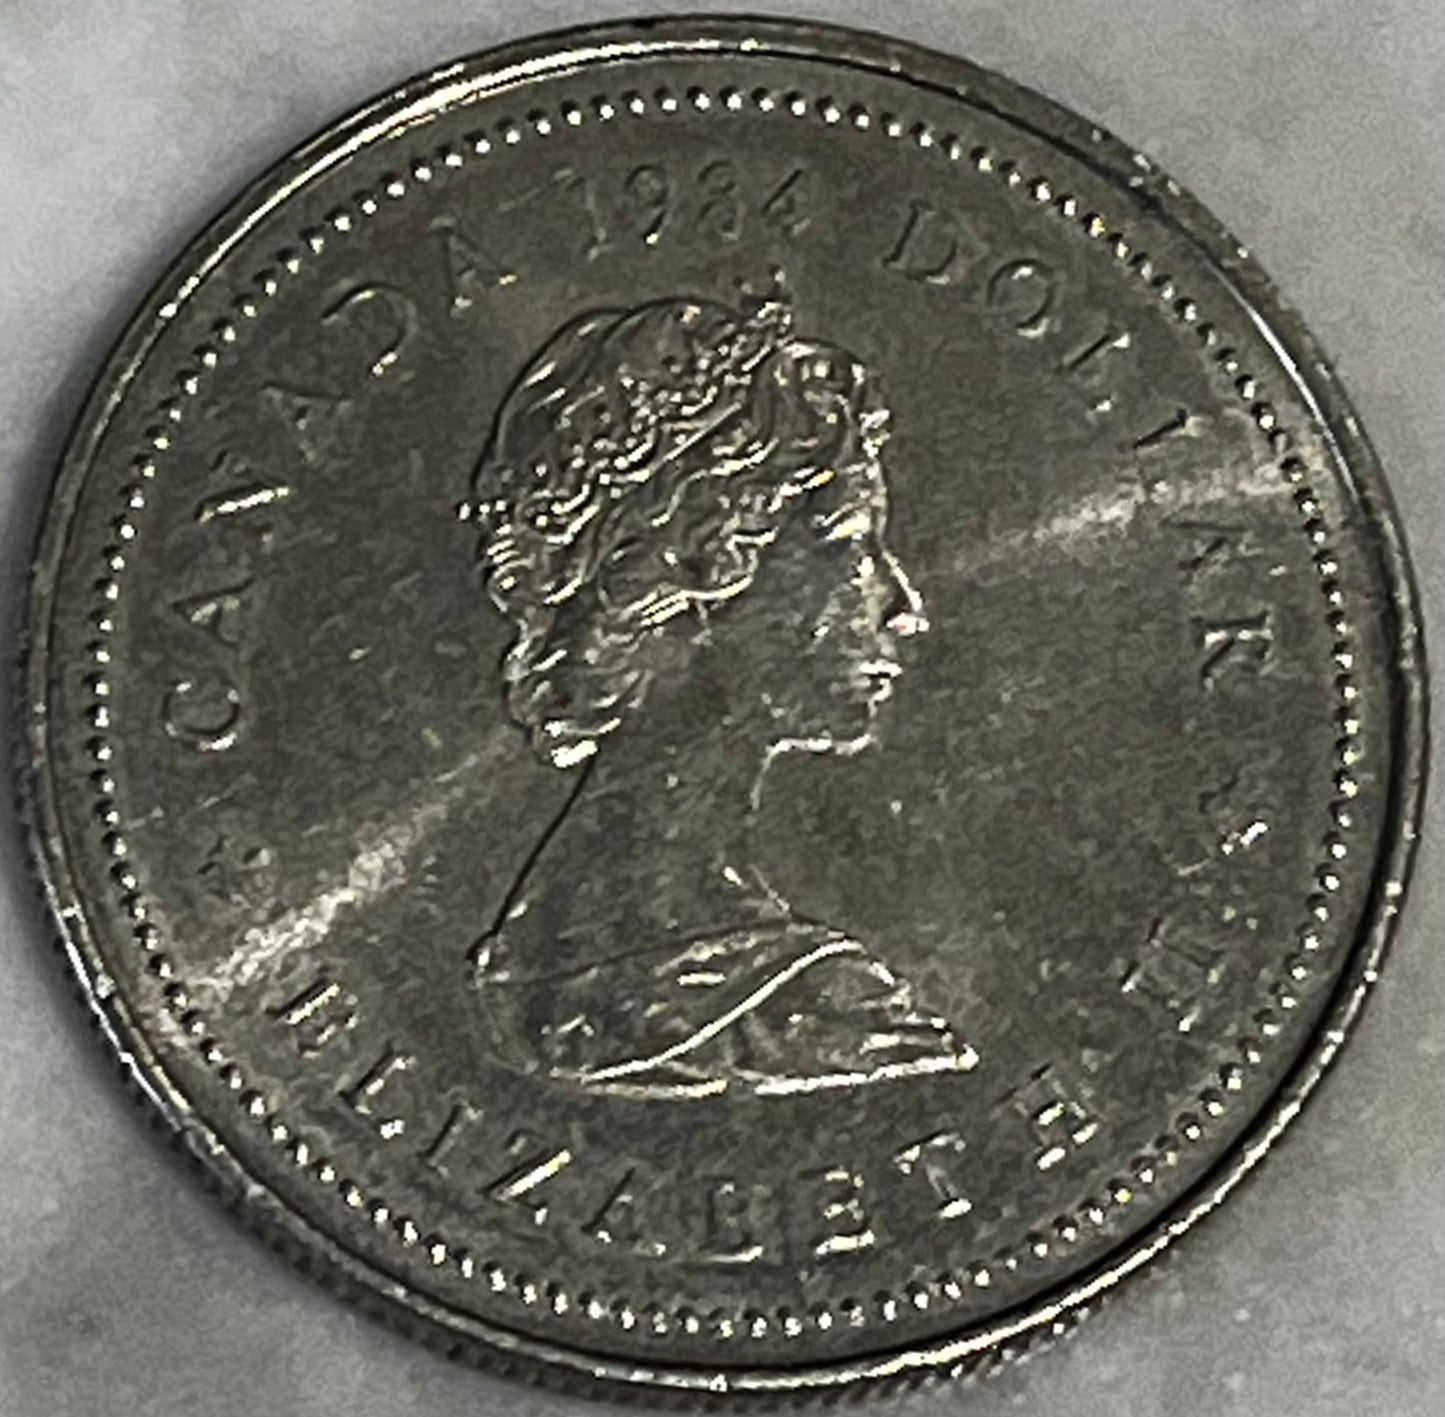 1984 - Canadian 1$ One Dollar Nickel Coin - Jacques Cartier Canada